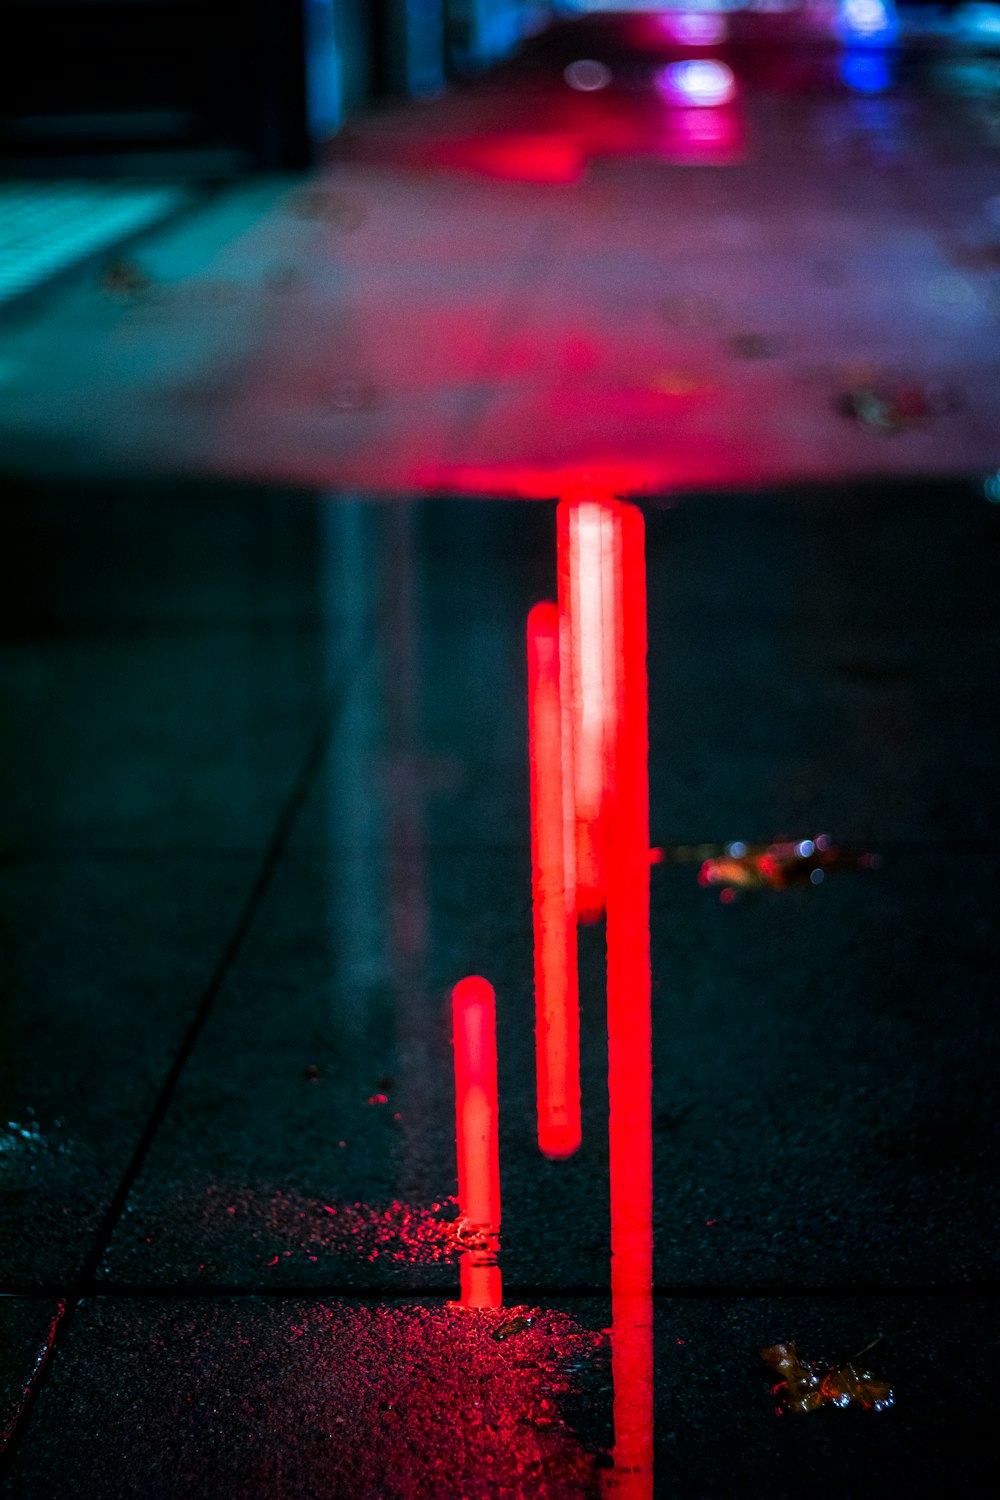 red light reflected on floor